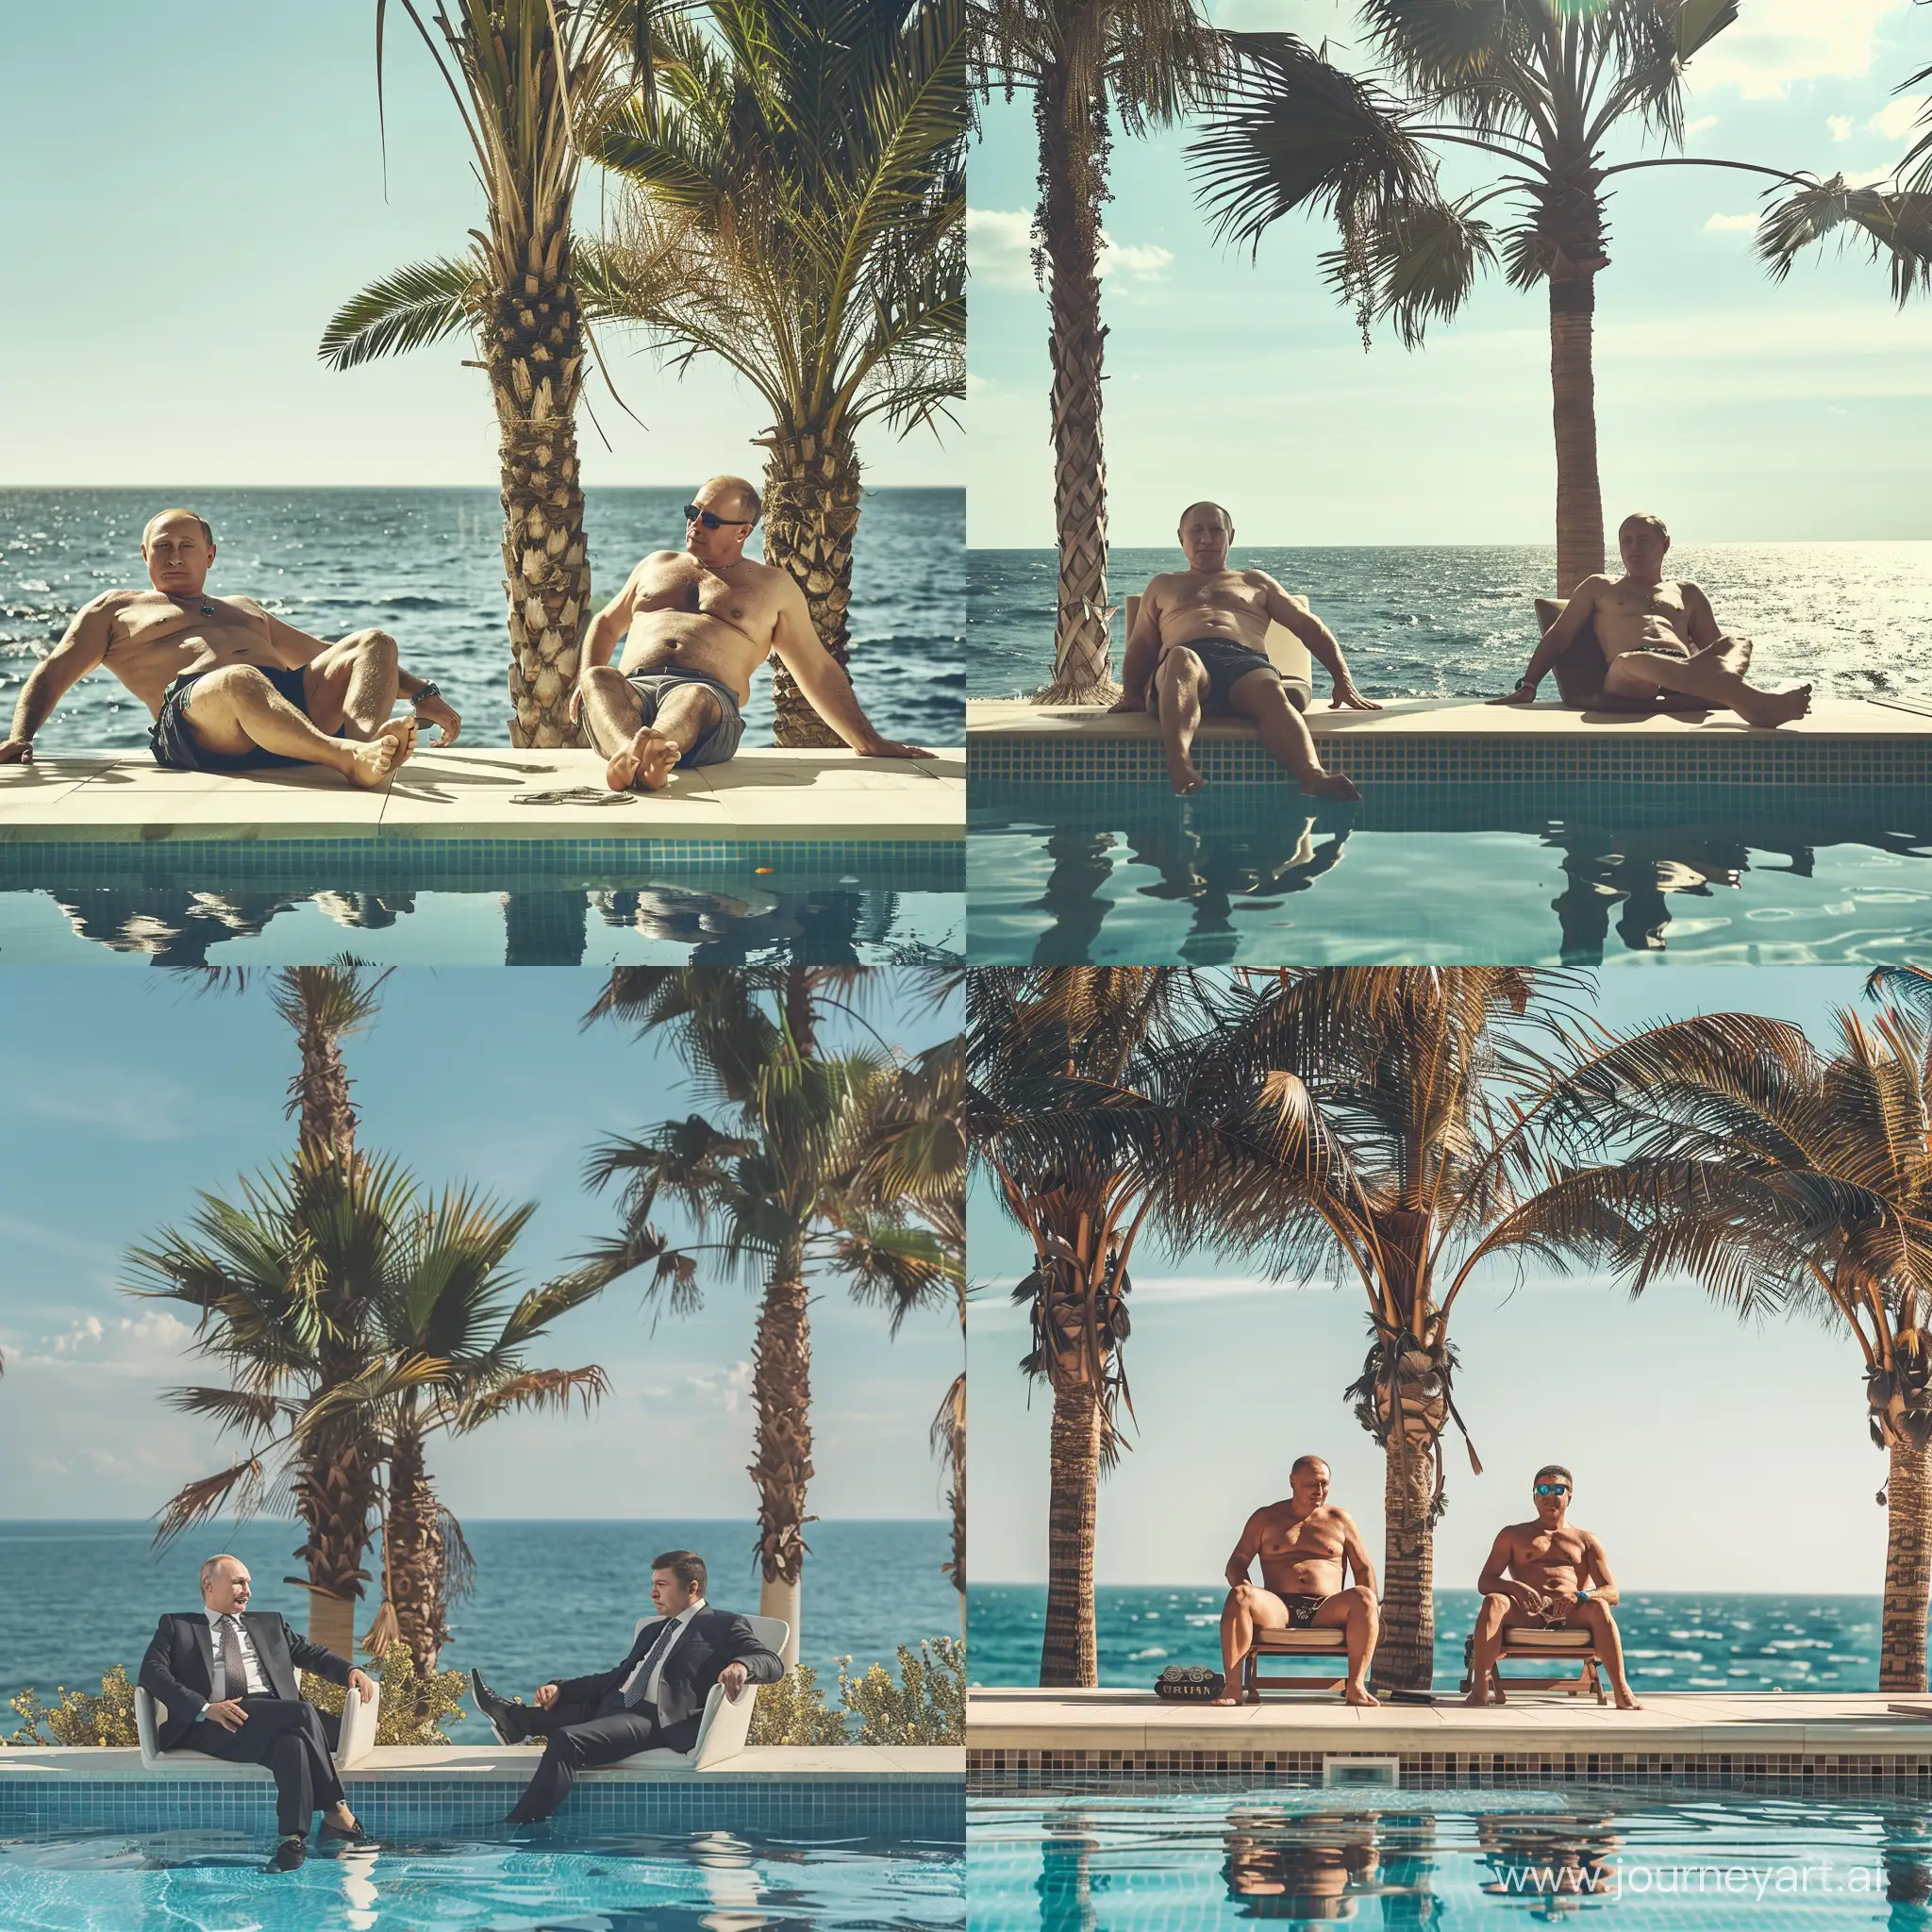 Leaders-of-Russia-and-Ukraine-Enjoying-Tropical-Retreat-with-Toned-Bodies-and-Sunny-Skies